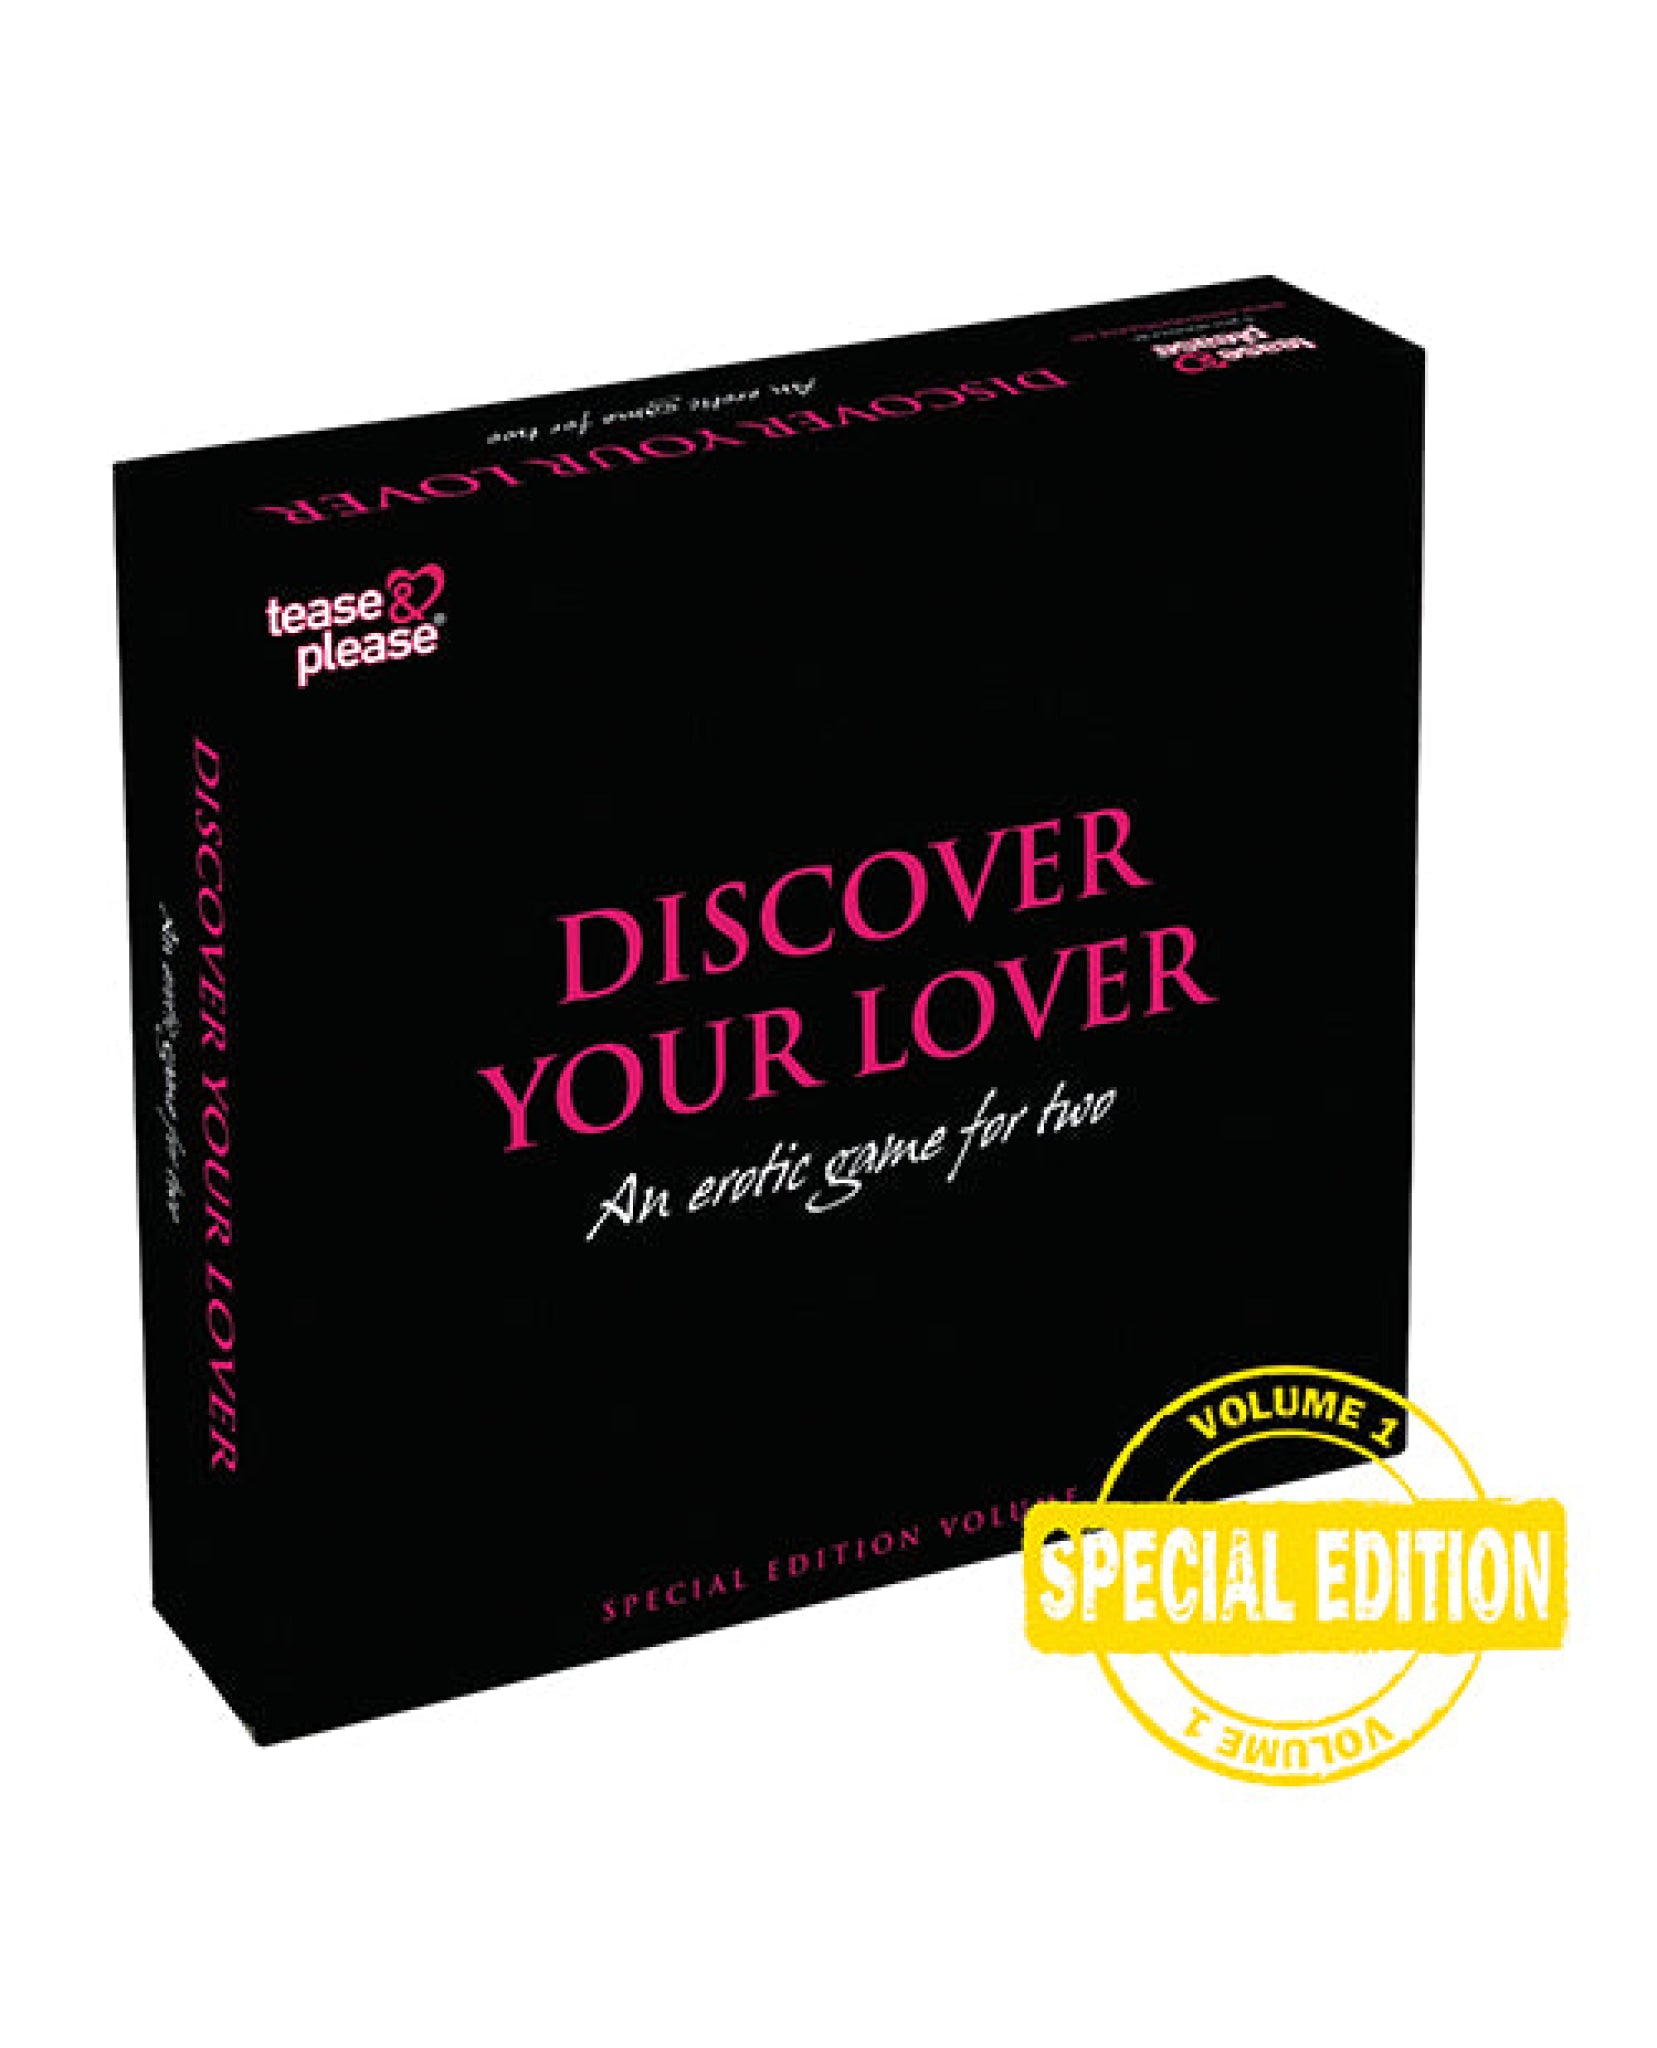 Tease & Please Discover Your Lover Special Edition Interslash